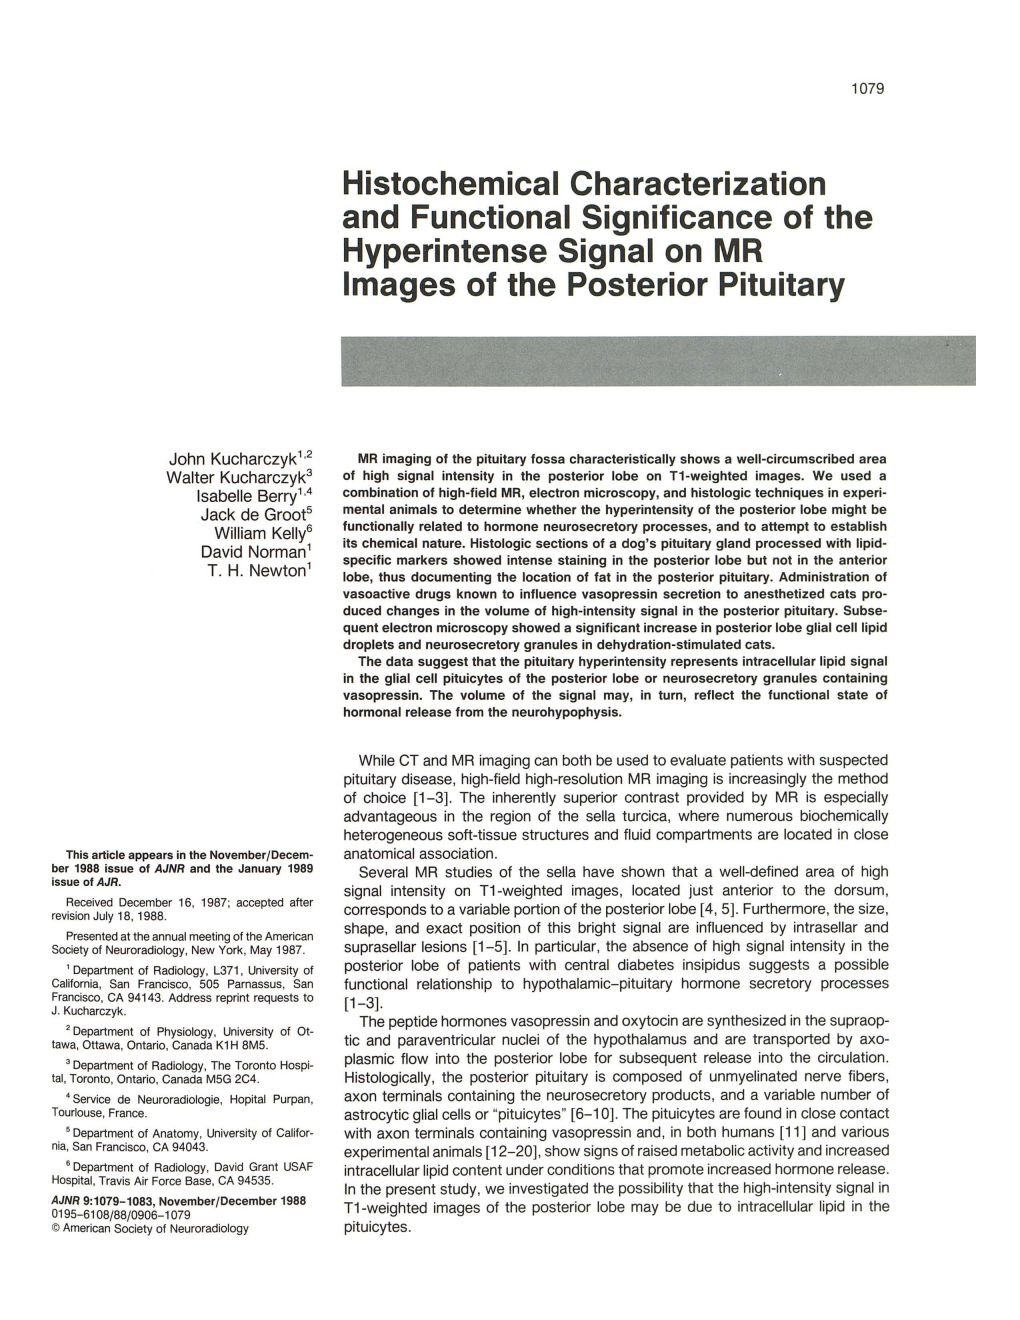 Histochemical Characterization and Functional Significance of the Hyperintense Signal on MR Images of the Posterior Pituitary